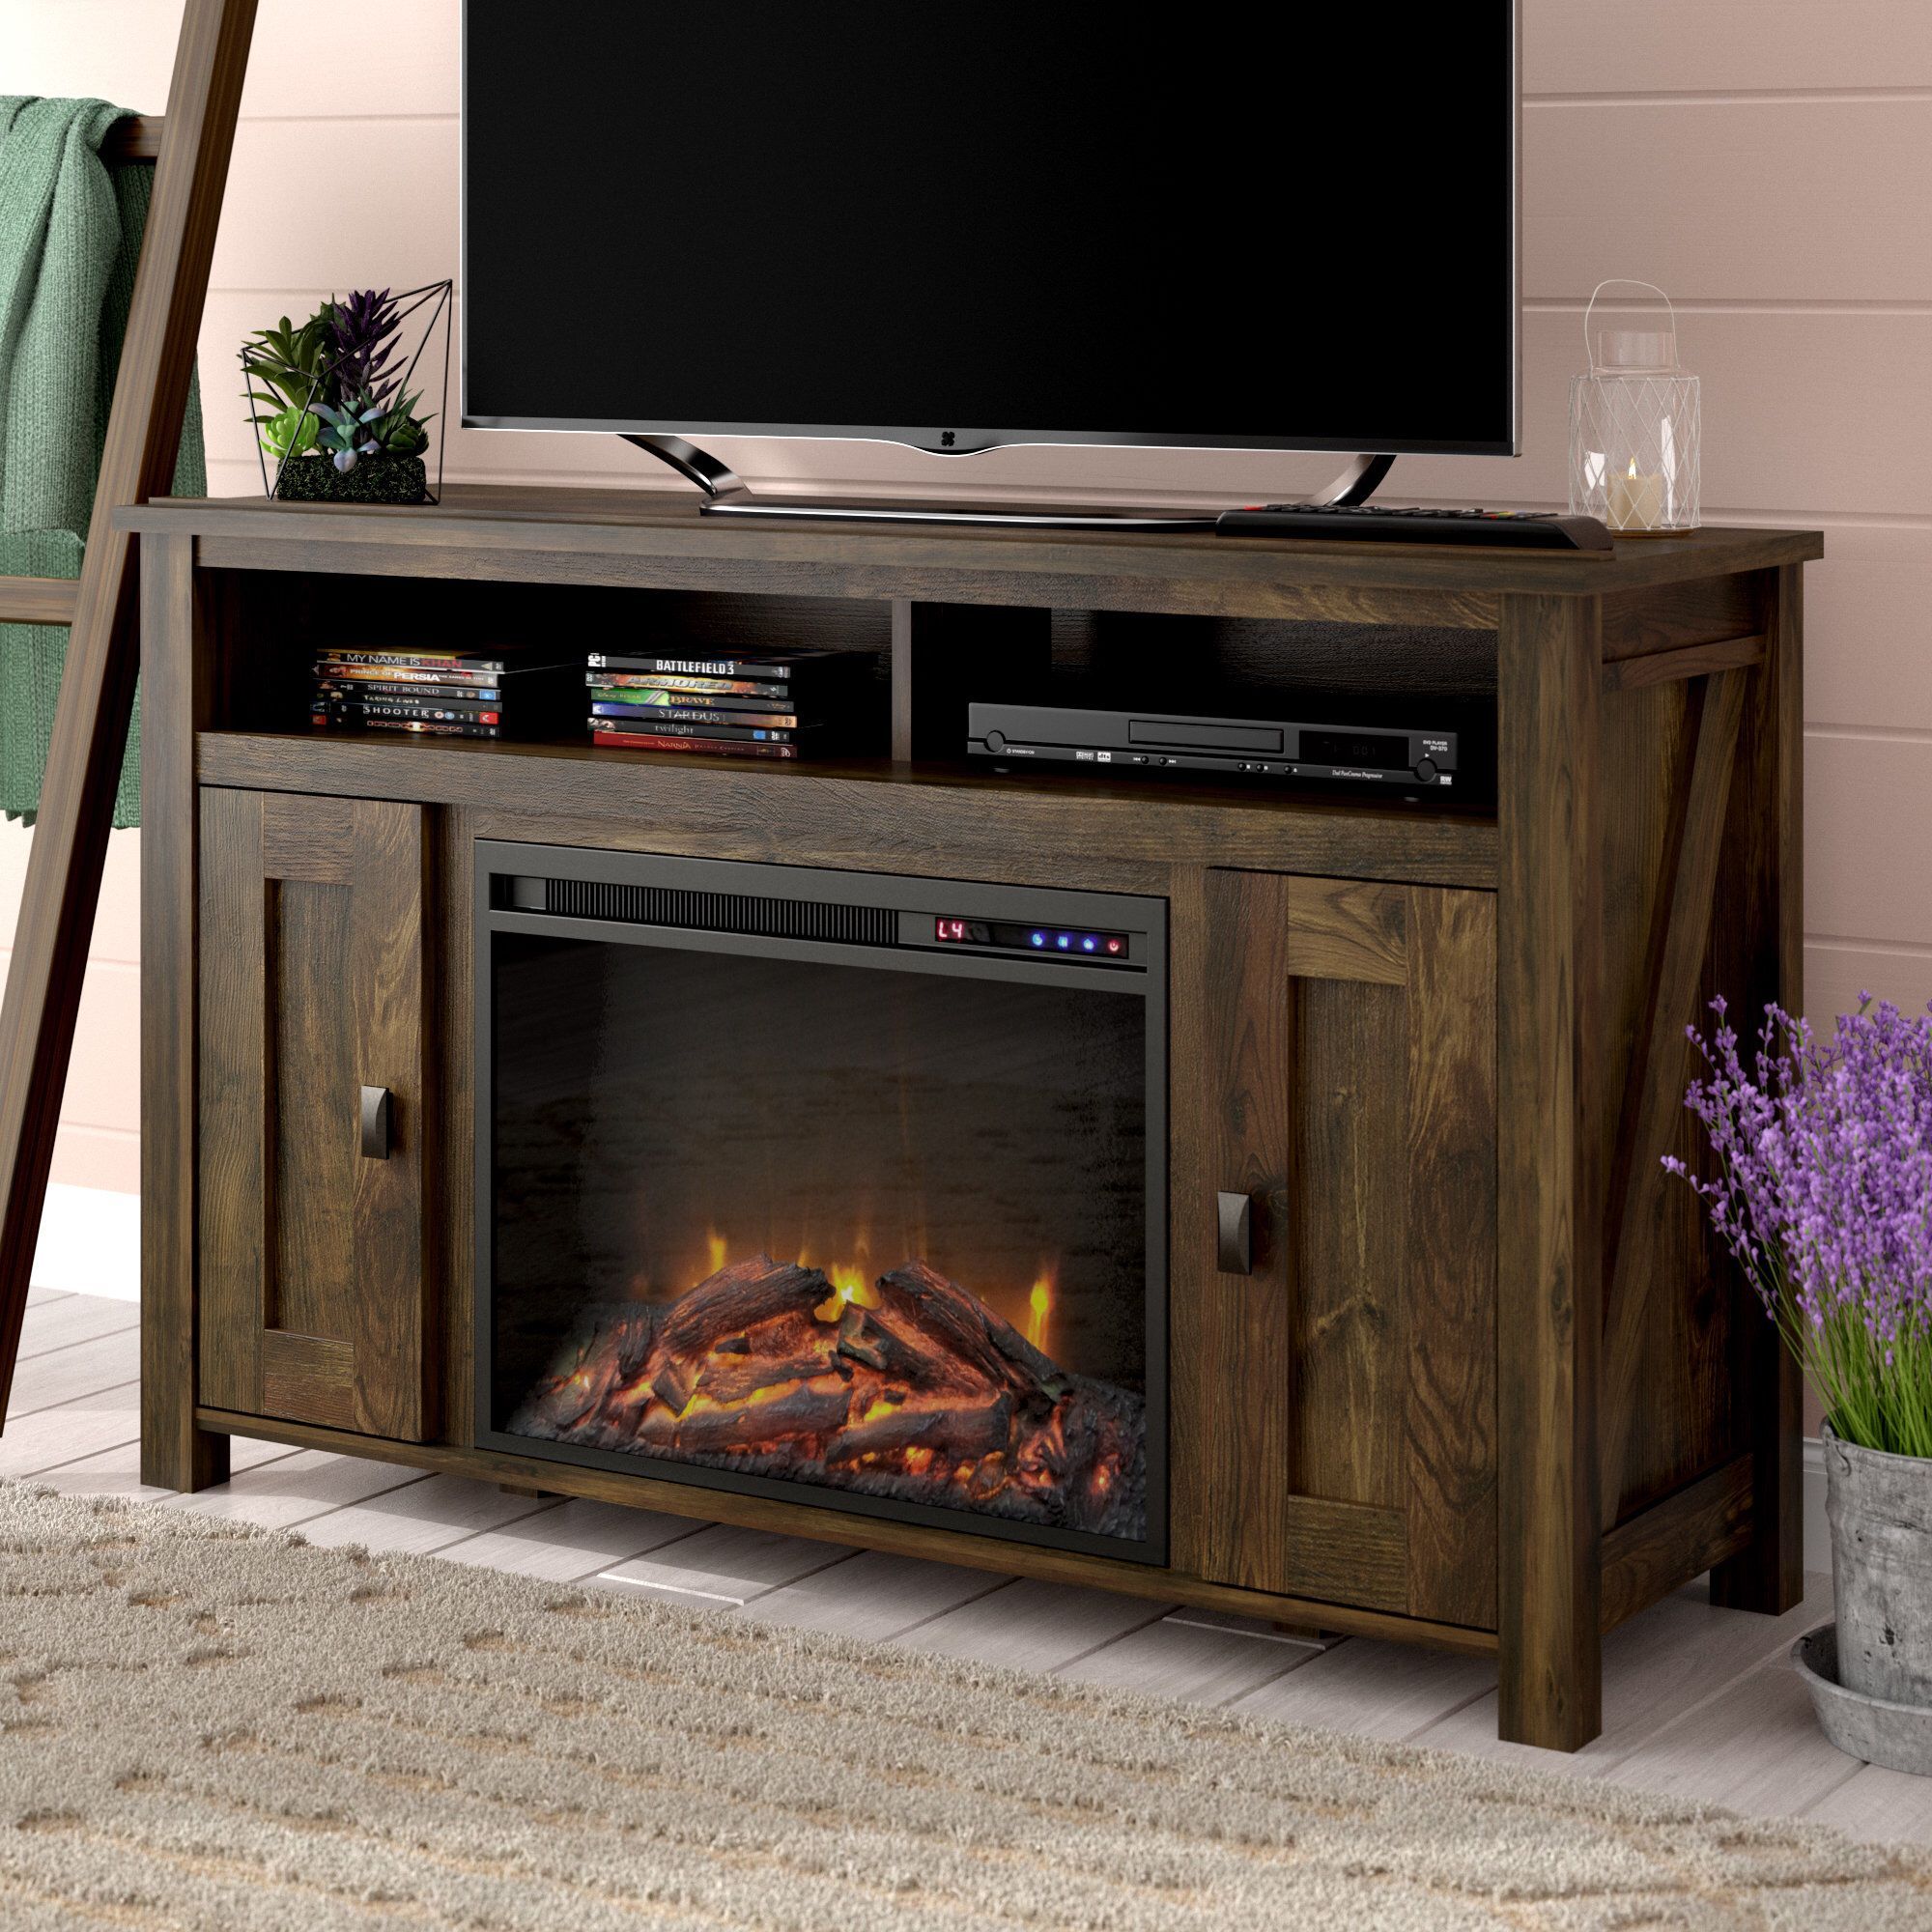 Whittier Tv Stand For Tvs Up To 50" With Electric Inside Mclelland Tv Stands For Tvs Up To 50&quot; (View 5 of 15)